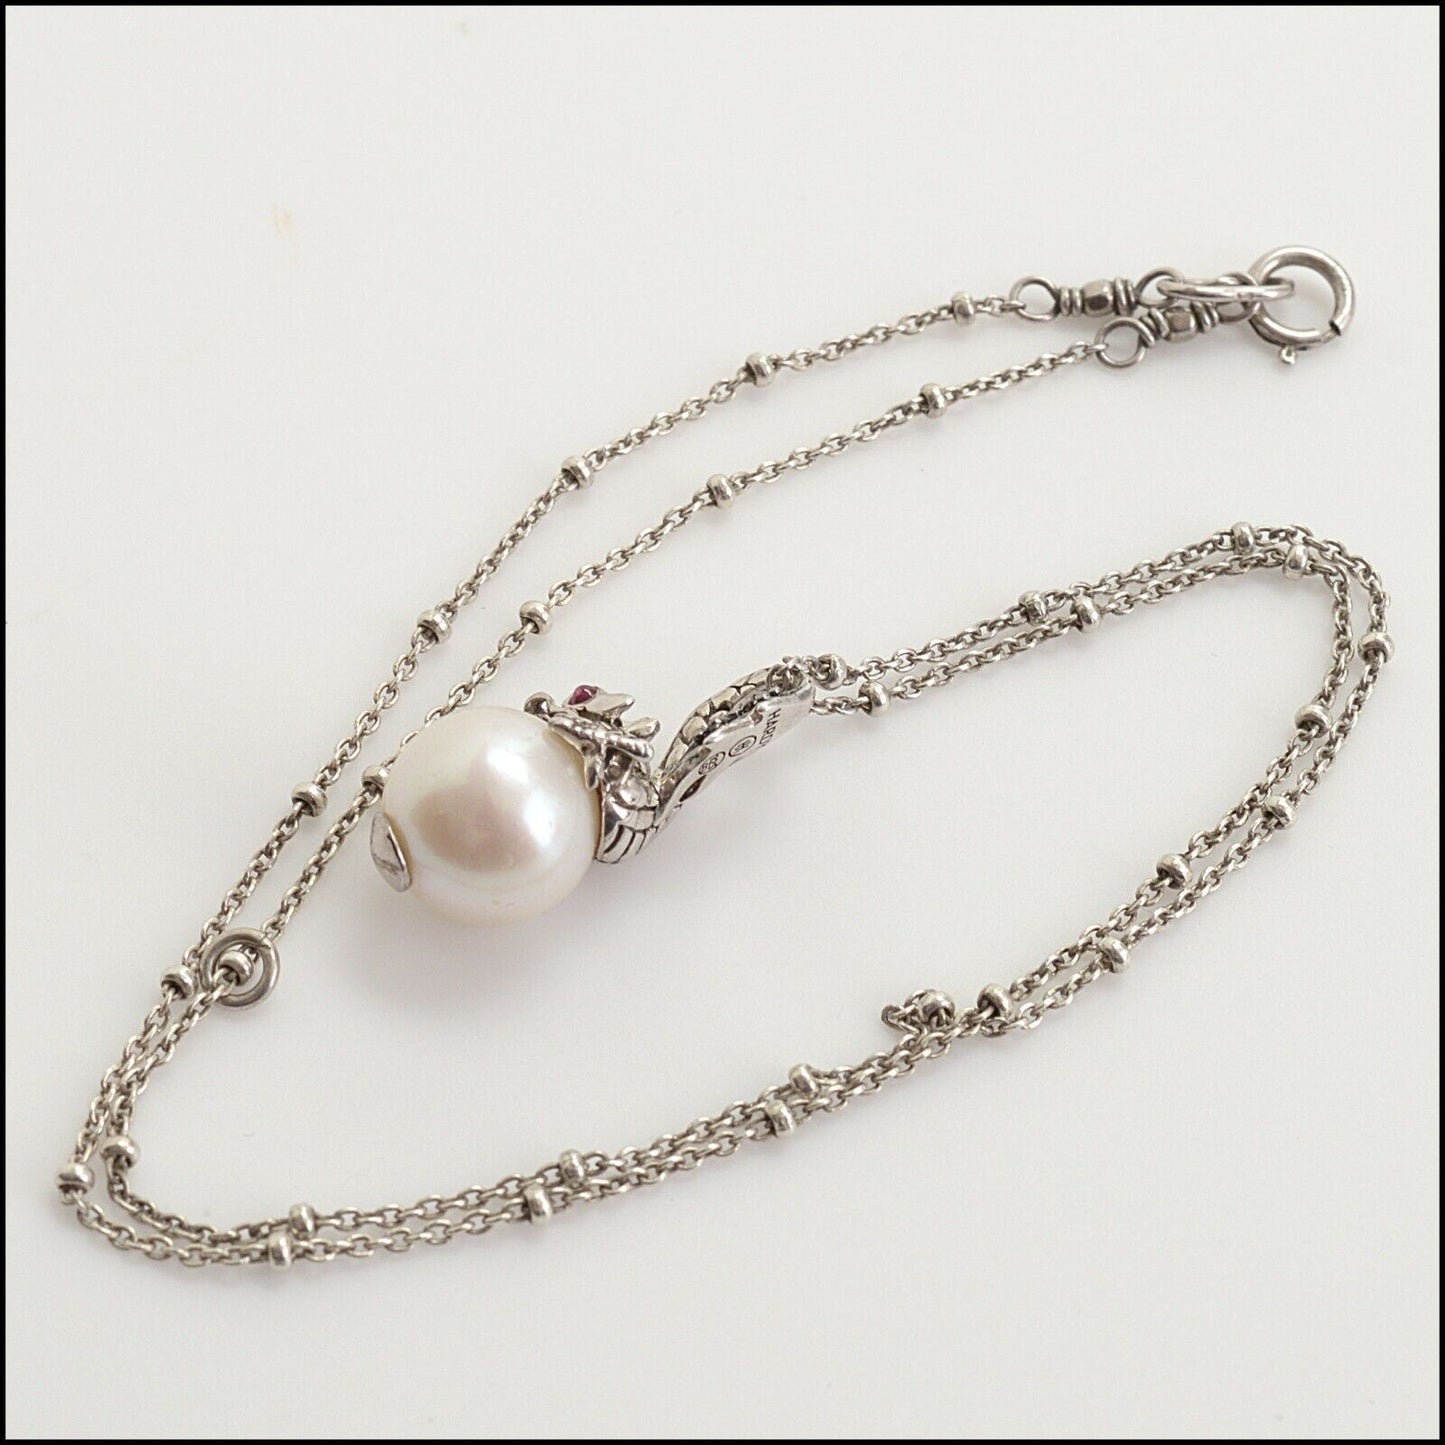 RDC13794 Authentic JOHN HARDY Sterling Silver Naga Dragon Pearl Pendant Necklace